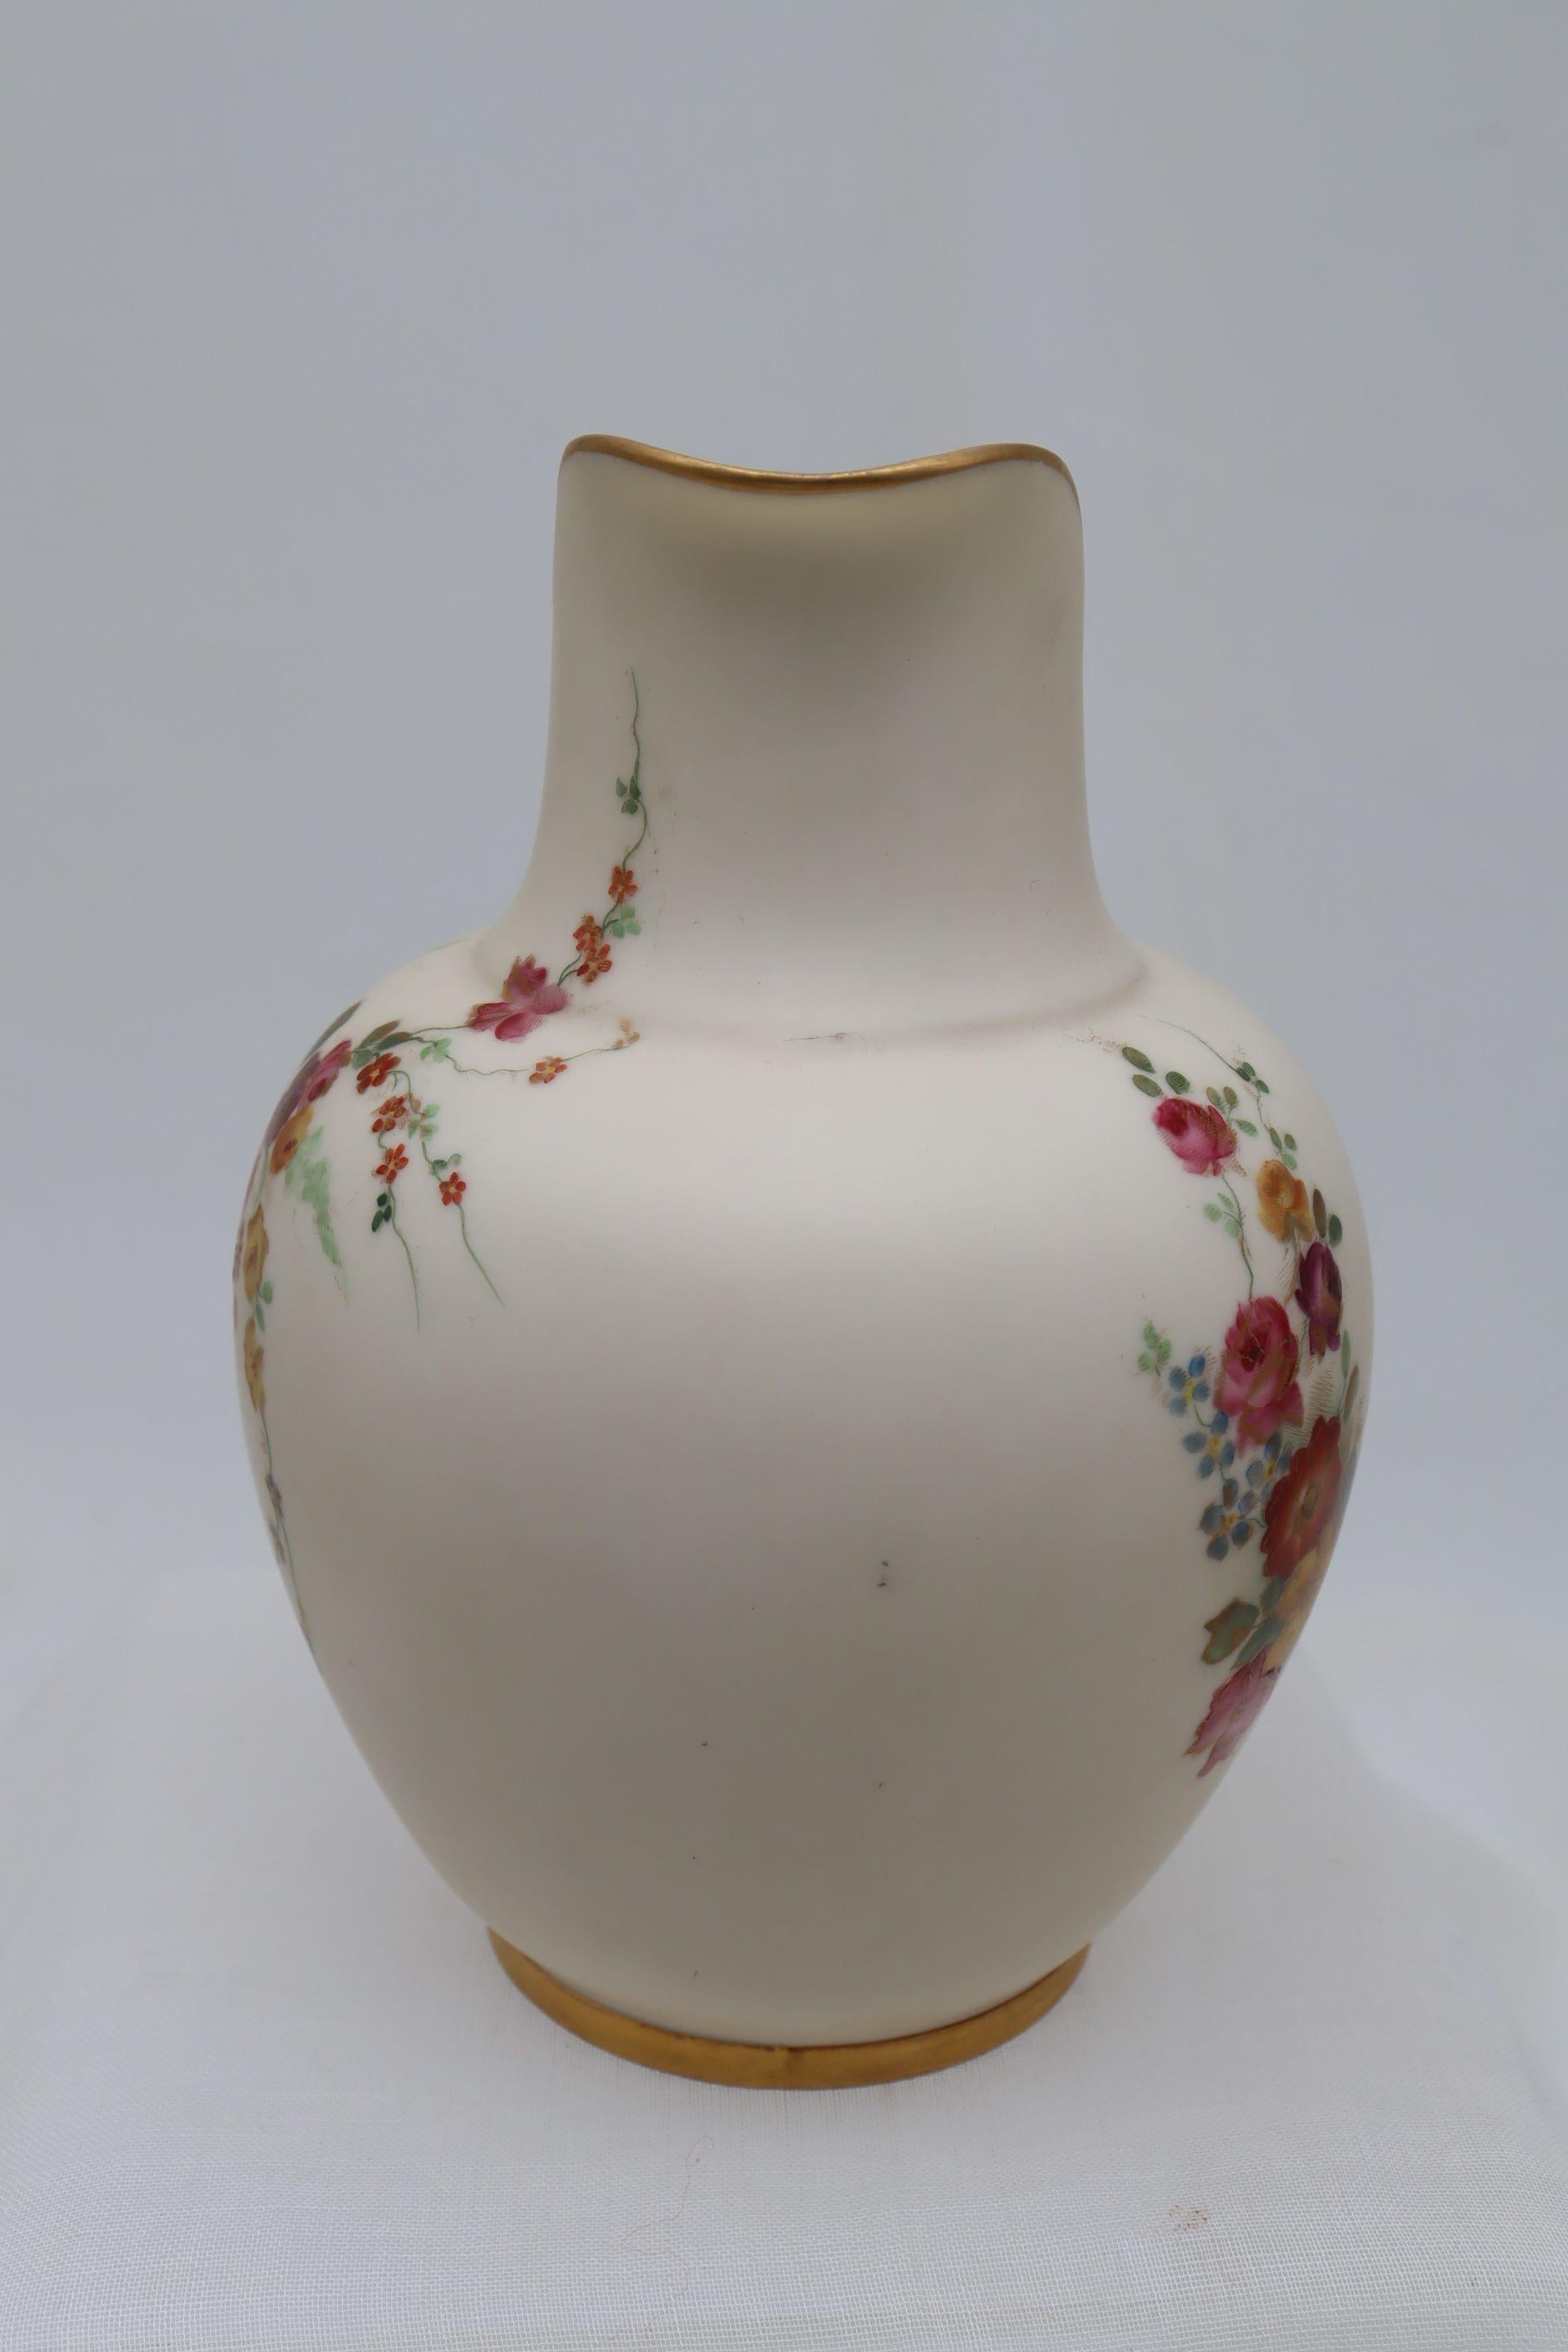 This Royal Worcester porcelain jug is decorated with a lively hand coloured spray of flowers, embellished with gilding, on a cream ground. There is a smaller spray on the reverse. The jug shape is listed as number 1094, which was introduced in 1885,